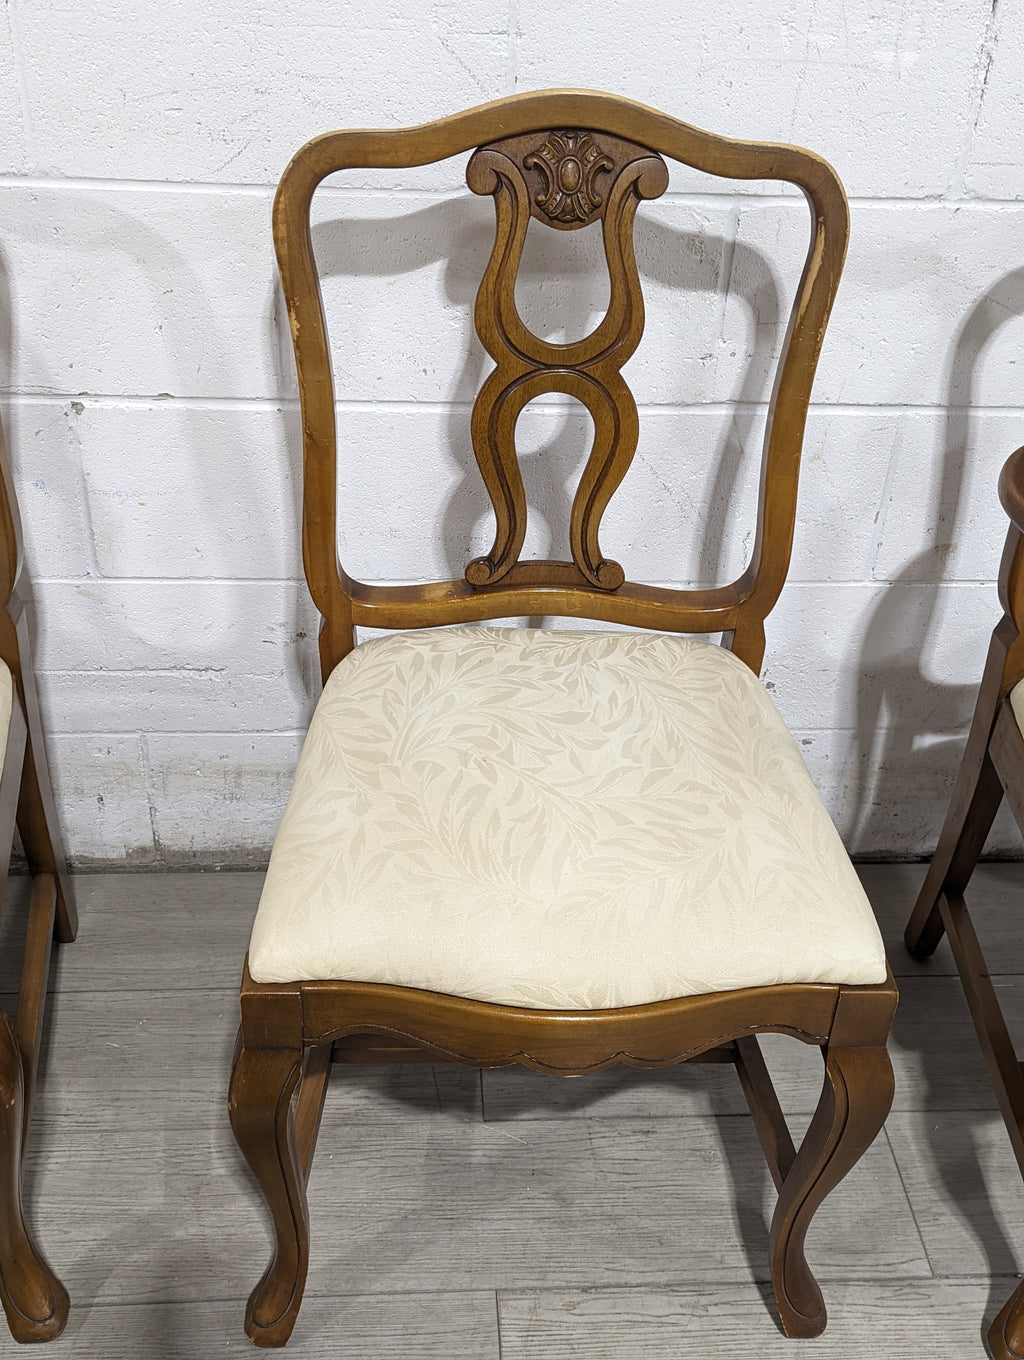 Set of 4 Vintage style chairs with beige upholstery